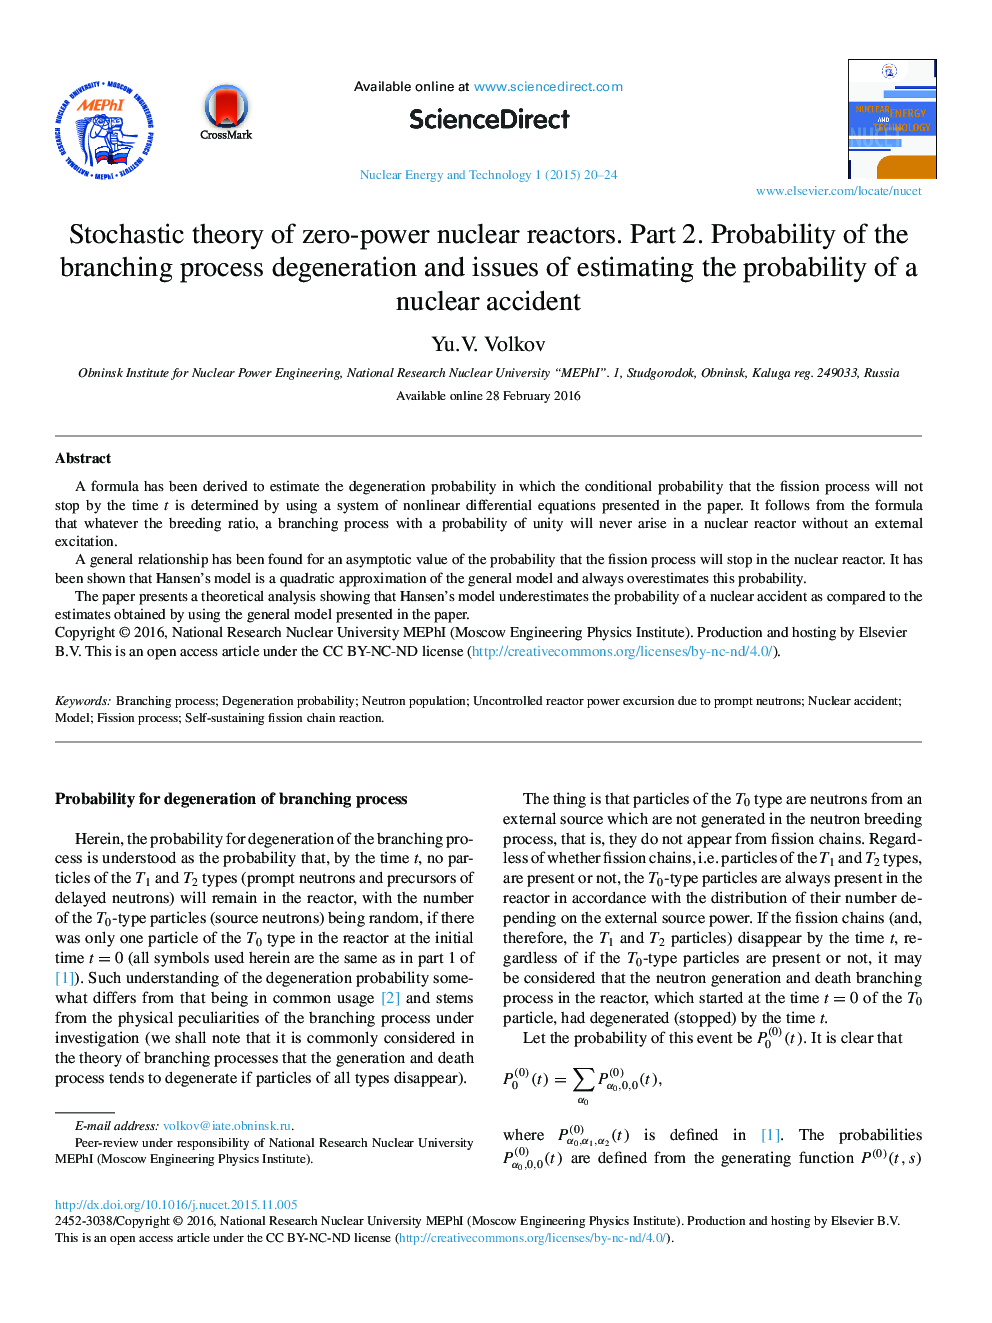 Stochastic theory of zero-power nuclear reactors. Part 2. Probability of the branching process degeneration and issues of estimating the probability of a nuclear accident